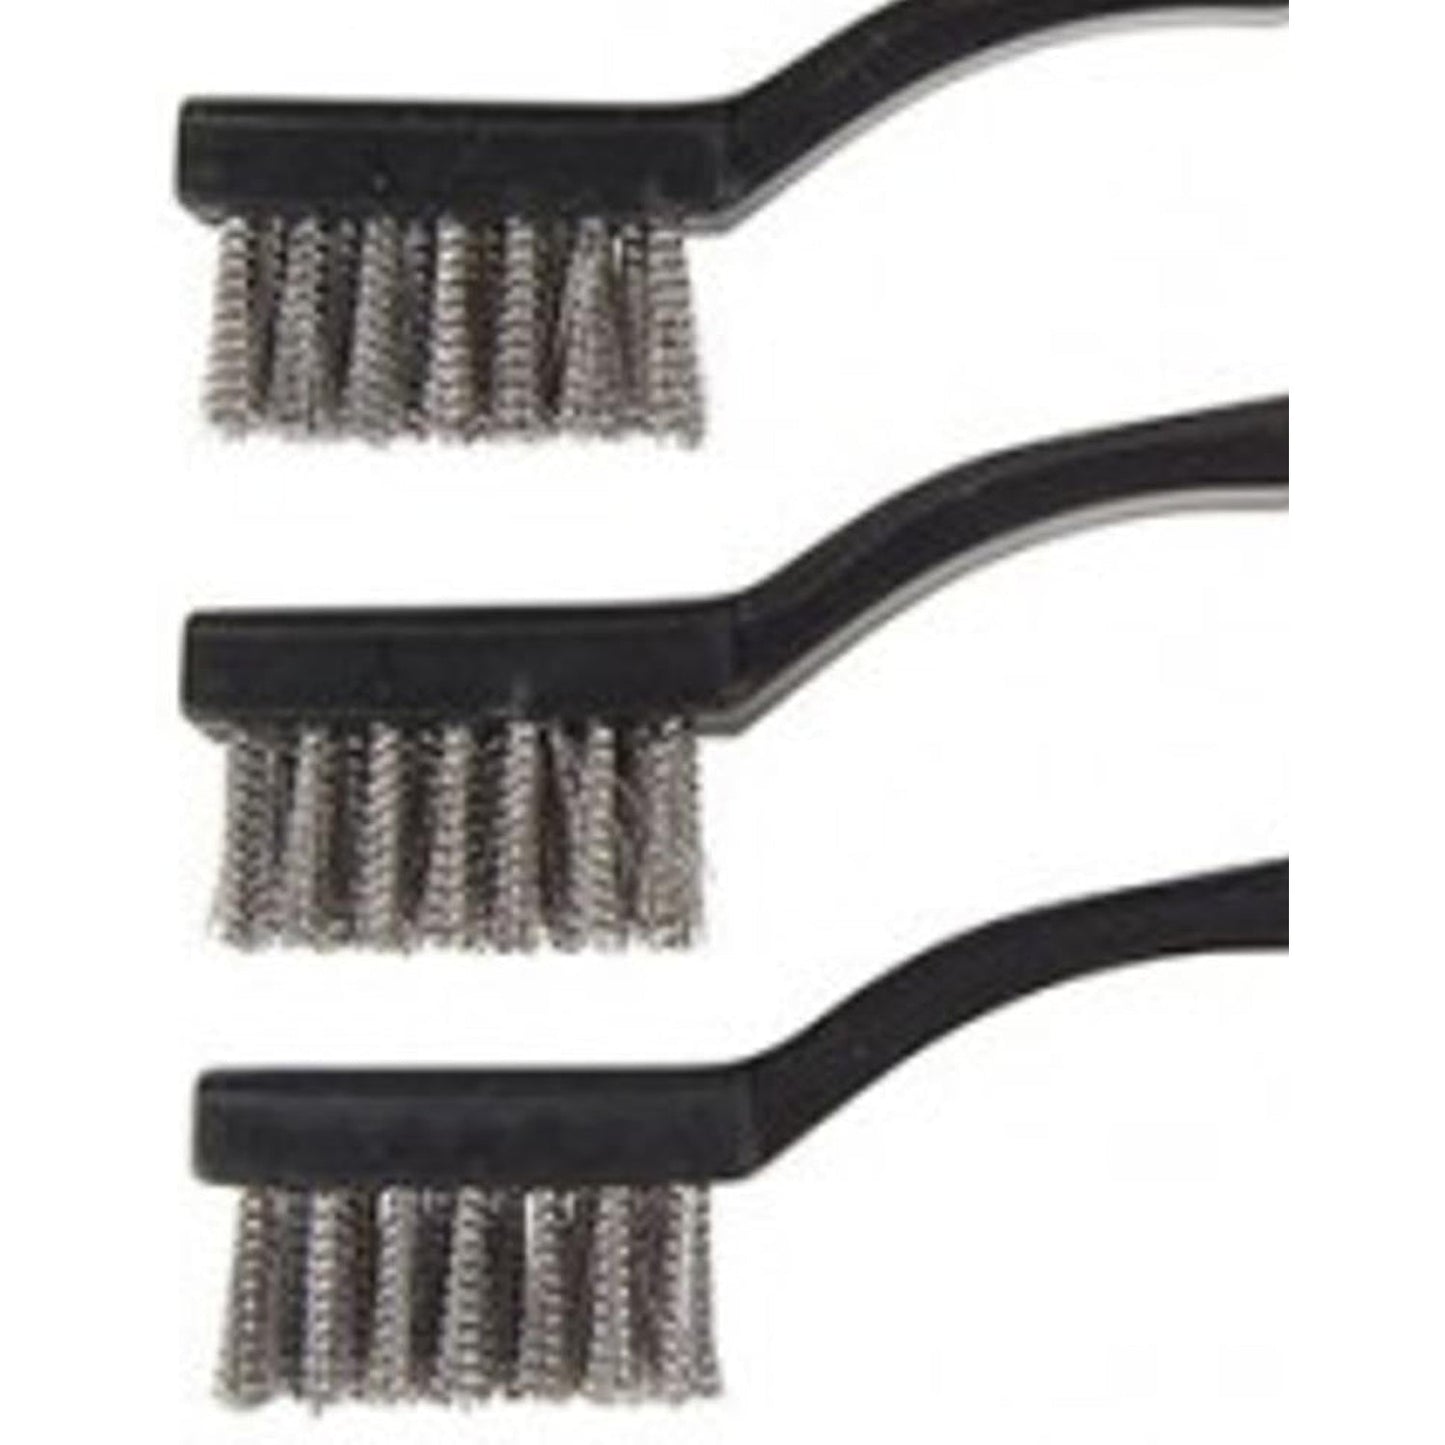 Hyde 46650 Mini Brushes Stainless Steel 13mm (1/2") (3 Pack)